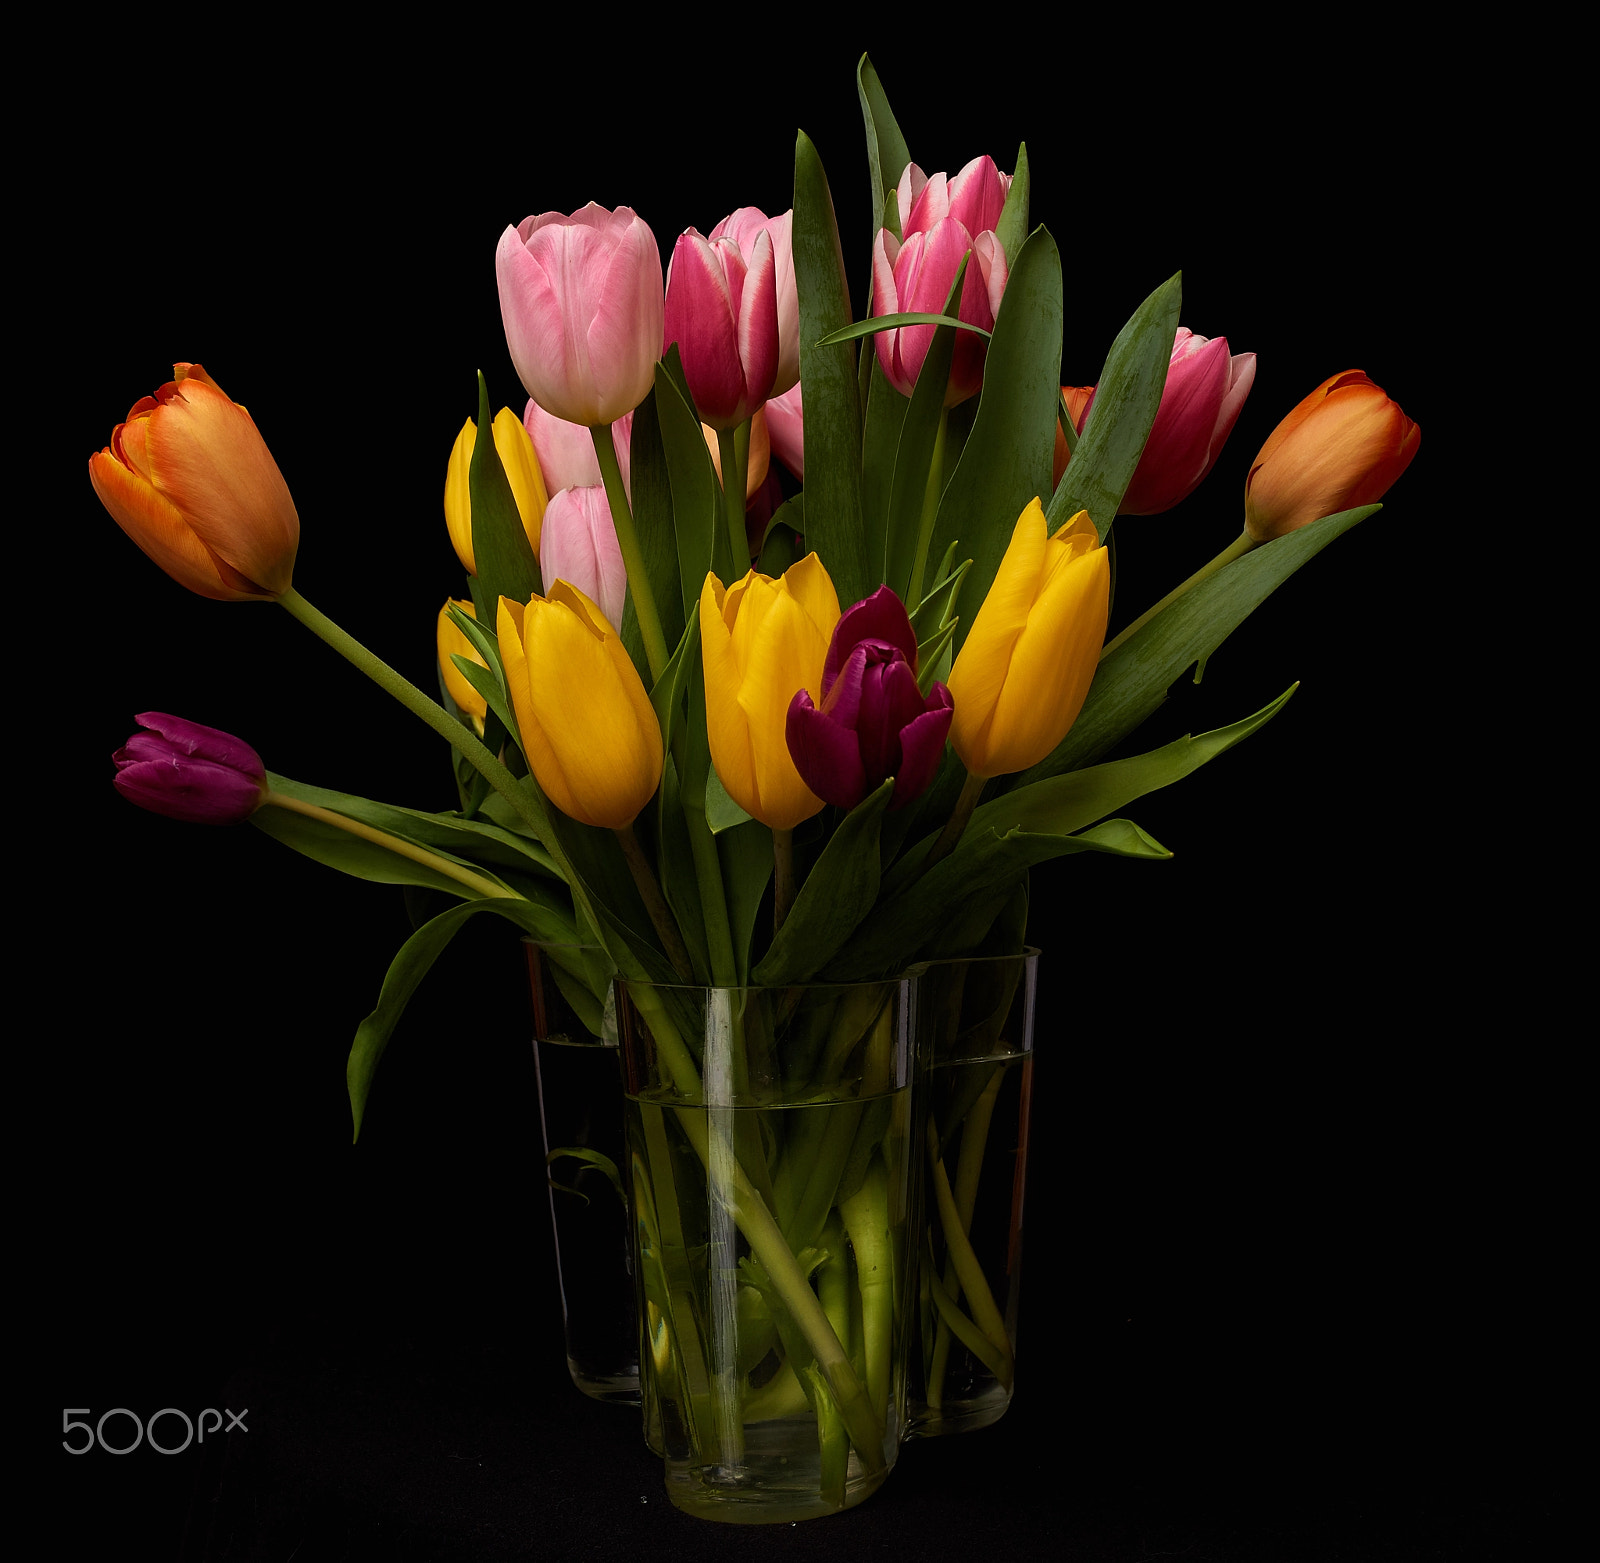 Sony a99 II sample photo. Flowers for mothers photography